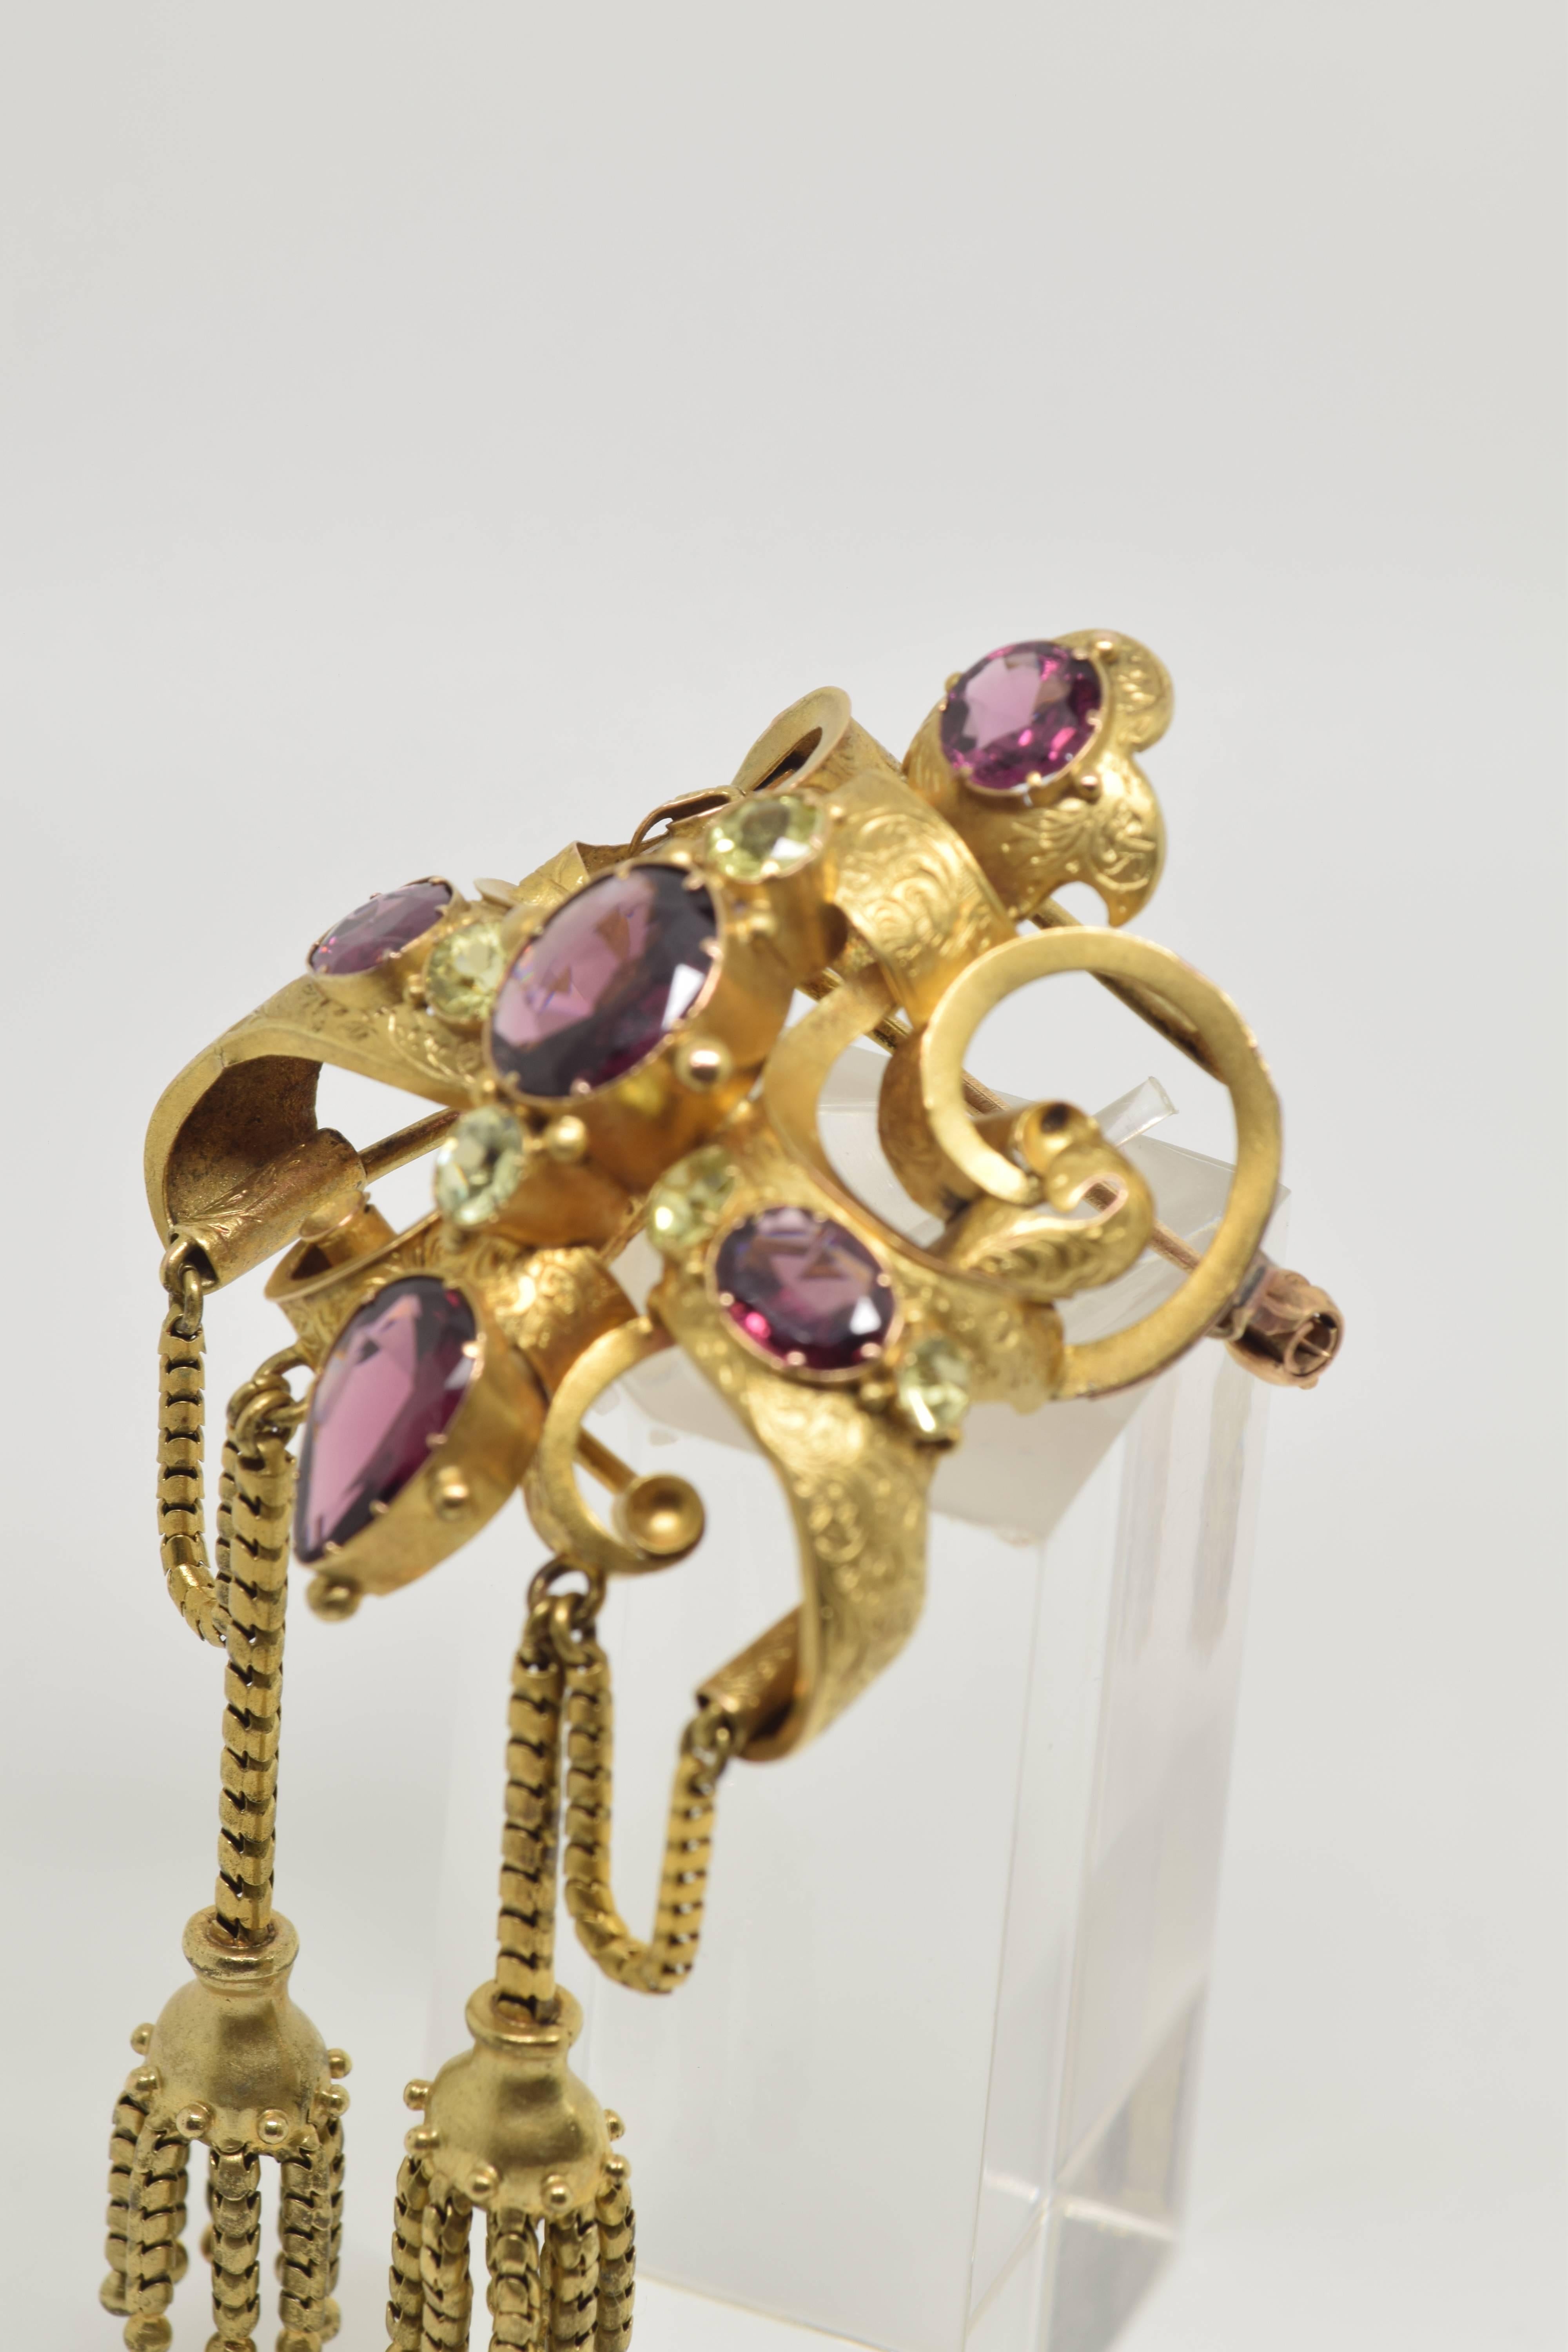 18kt Gold Brooch with Garnets, Possibly, 19th Century For Sale 2